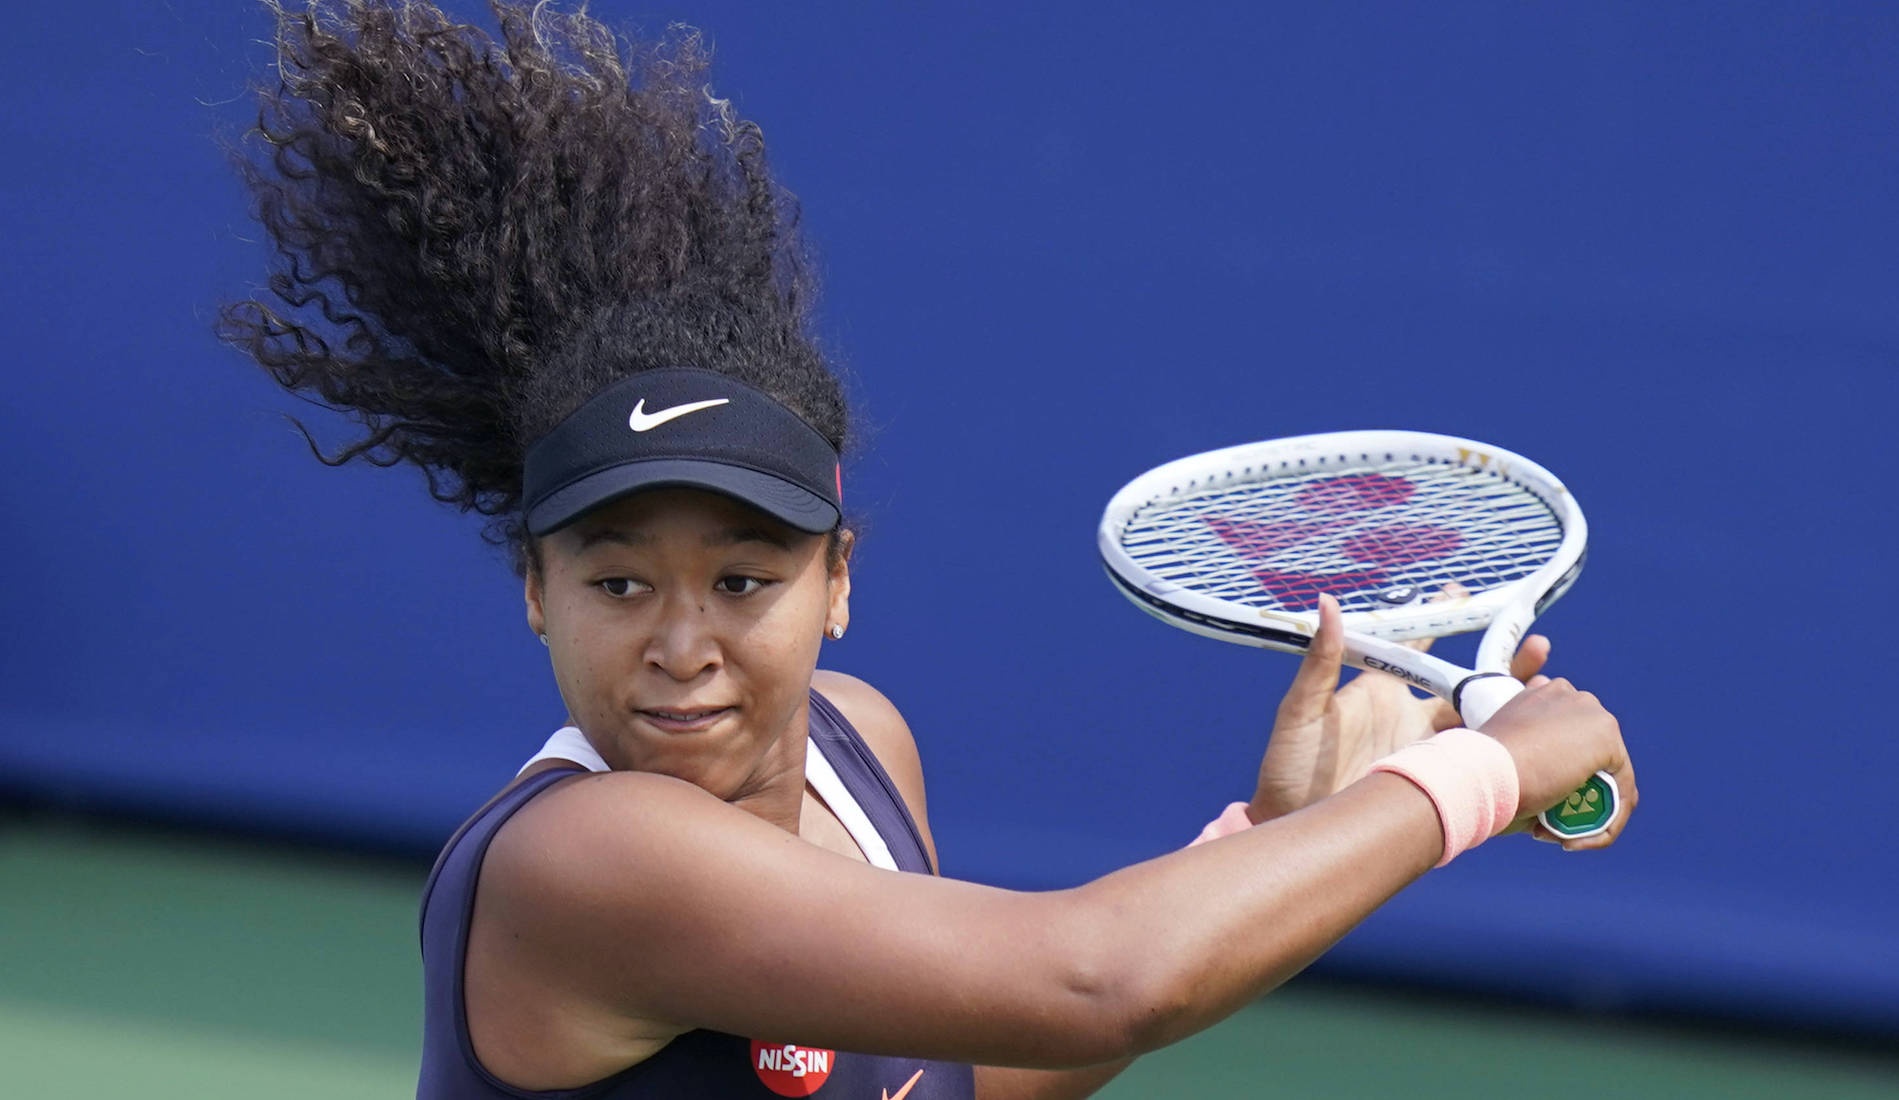 Naomi Osaka at Western and Southern Open, August 2020, Flushing Meadows, New York